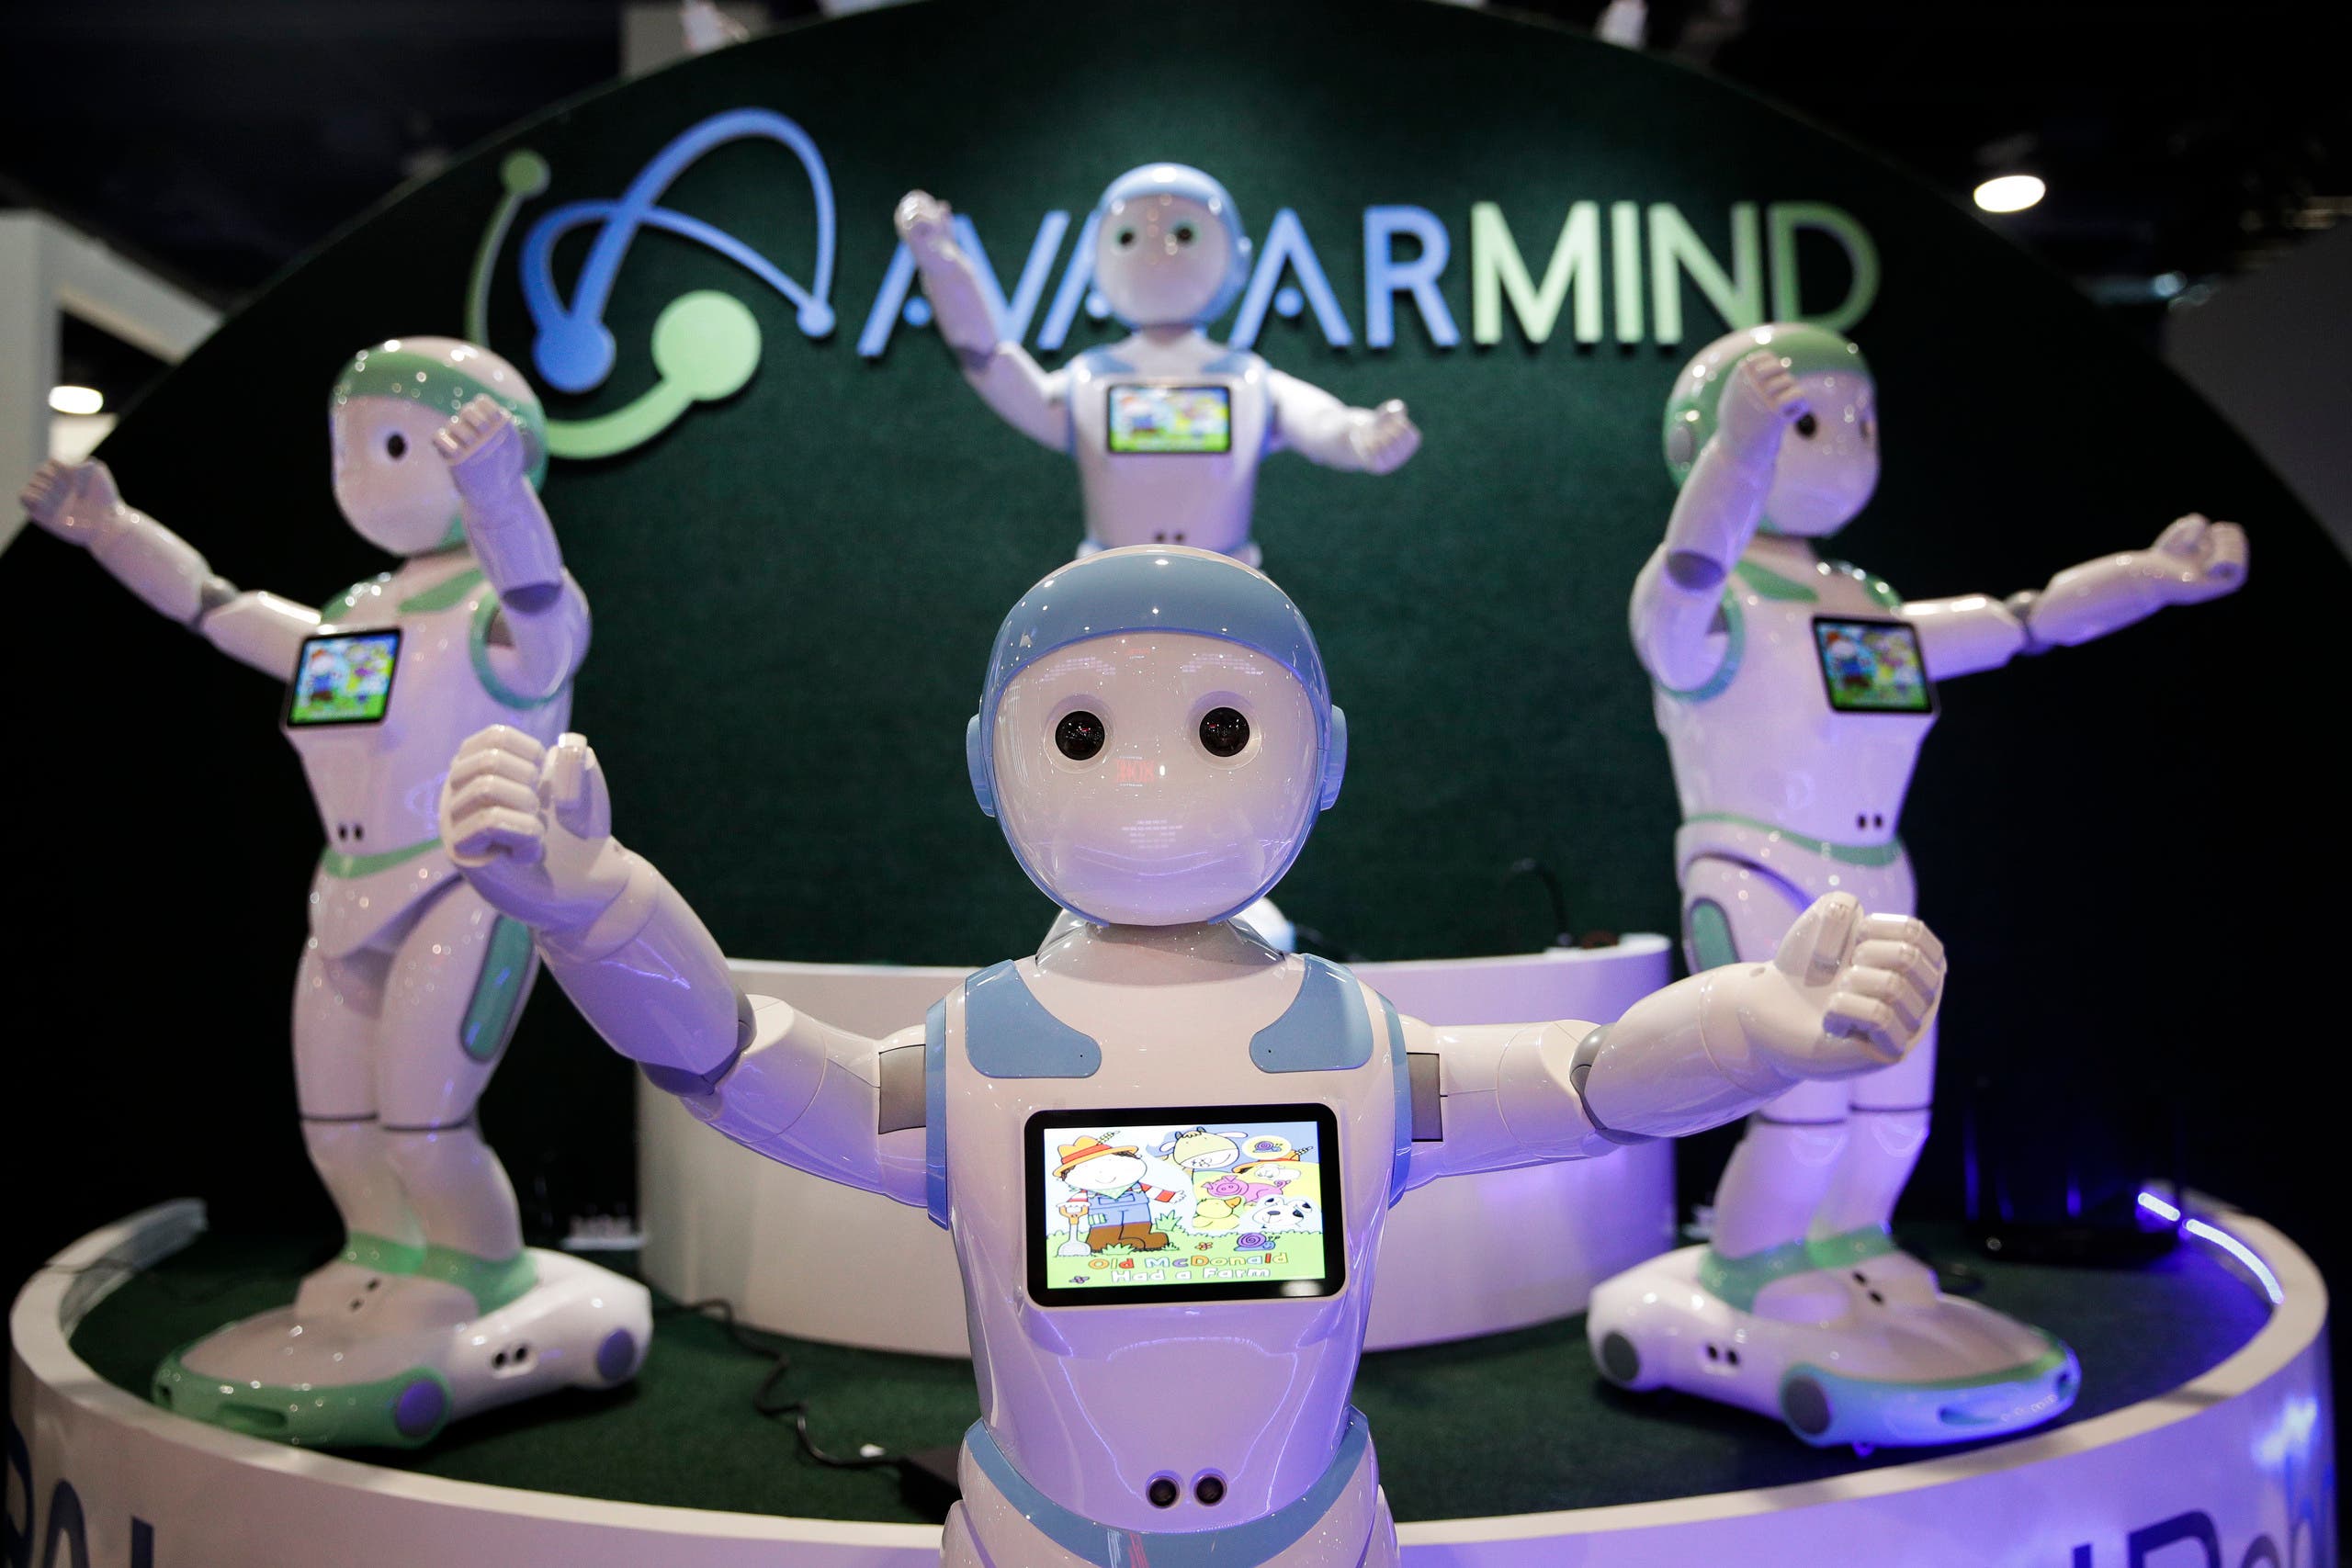 AvatarMind's iPal companion robots are displayed at CES International. (AP)